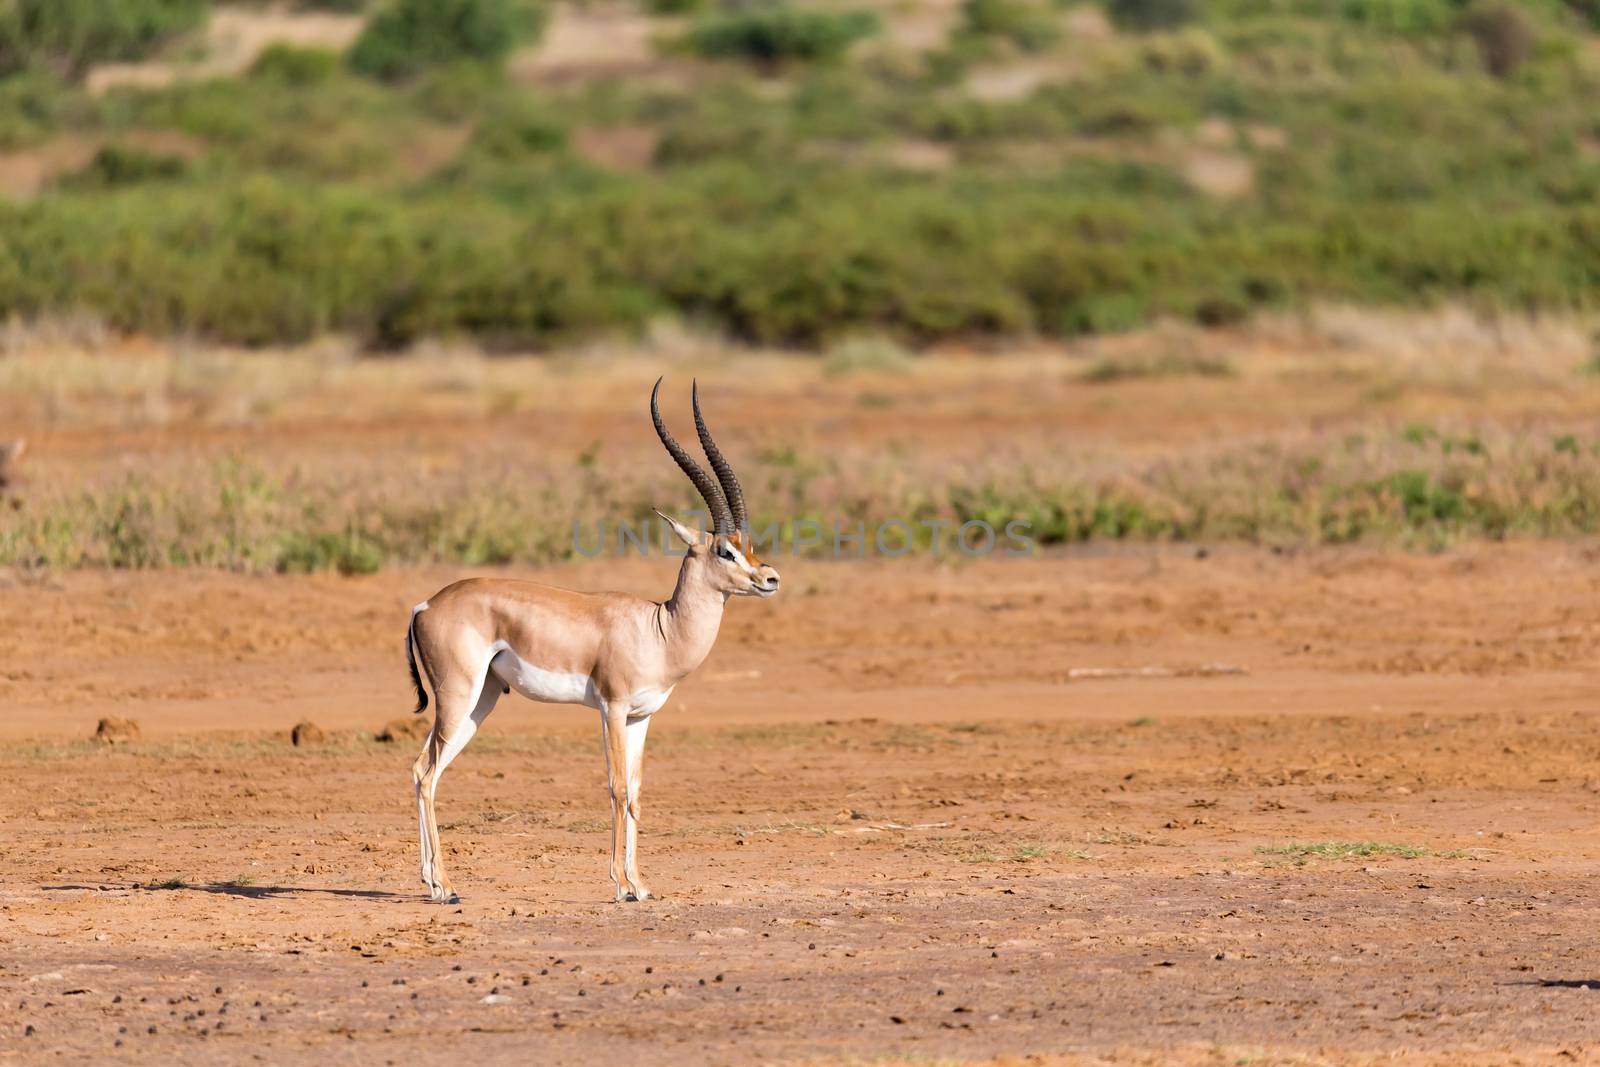 One Grant Gazelle stands in the middle of the grassy landscape of Kenya